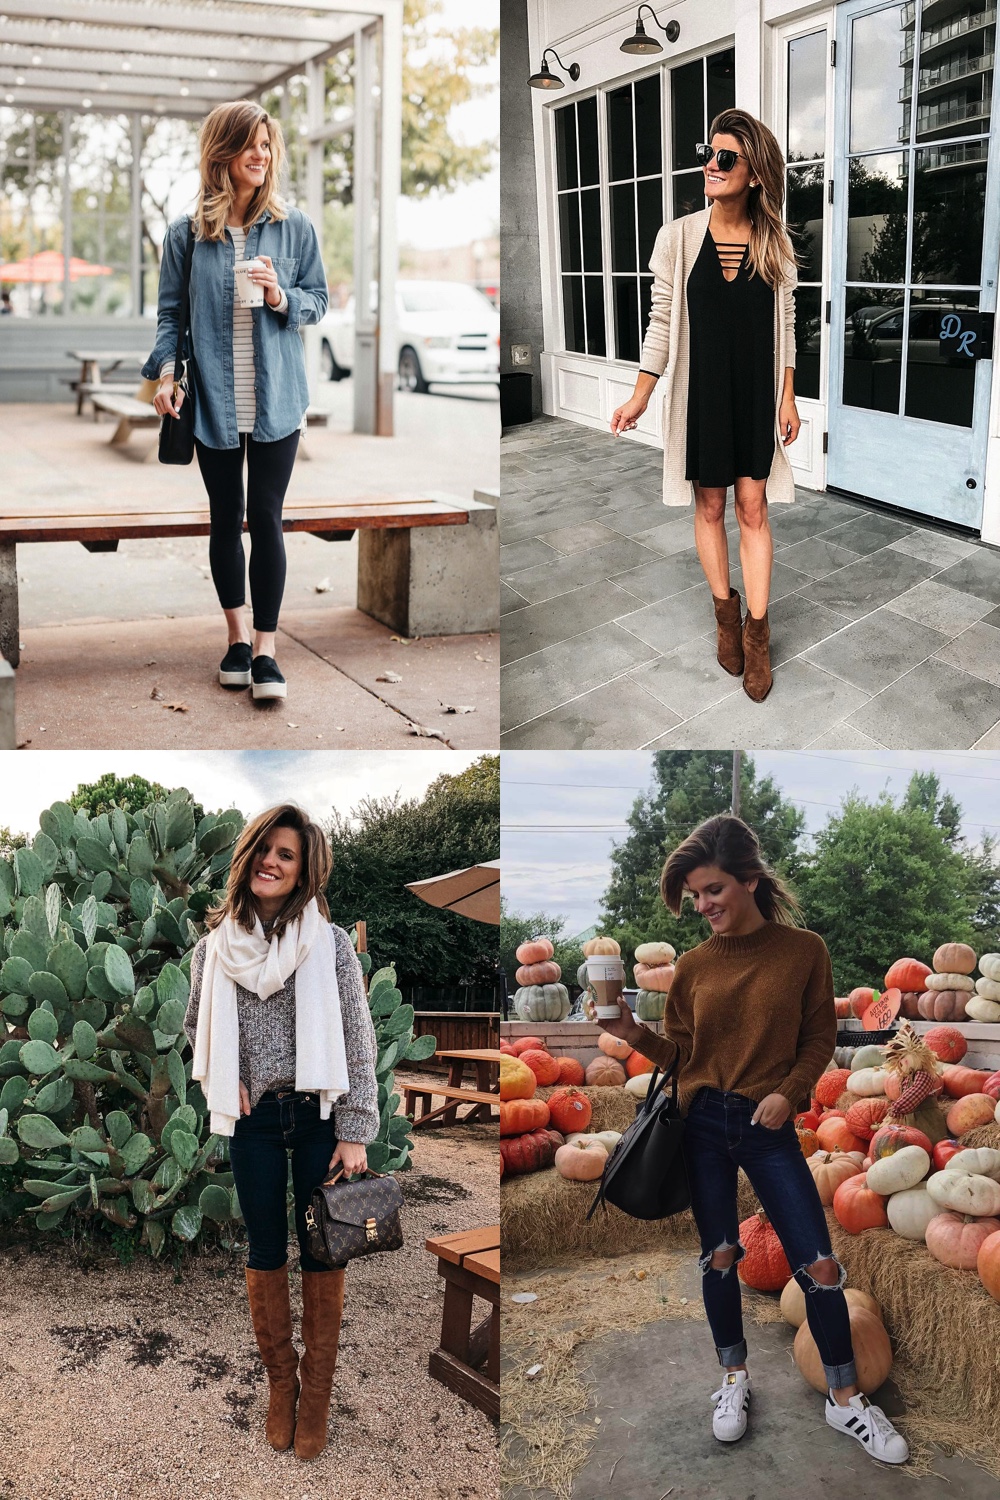 https://www.brightontheday.com/wp-content/uploads/2018/11/thanksgiving-outfit-ideas.jpg